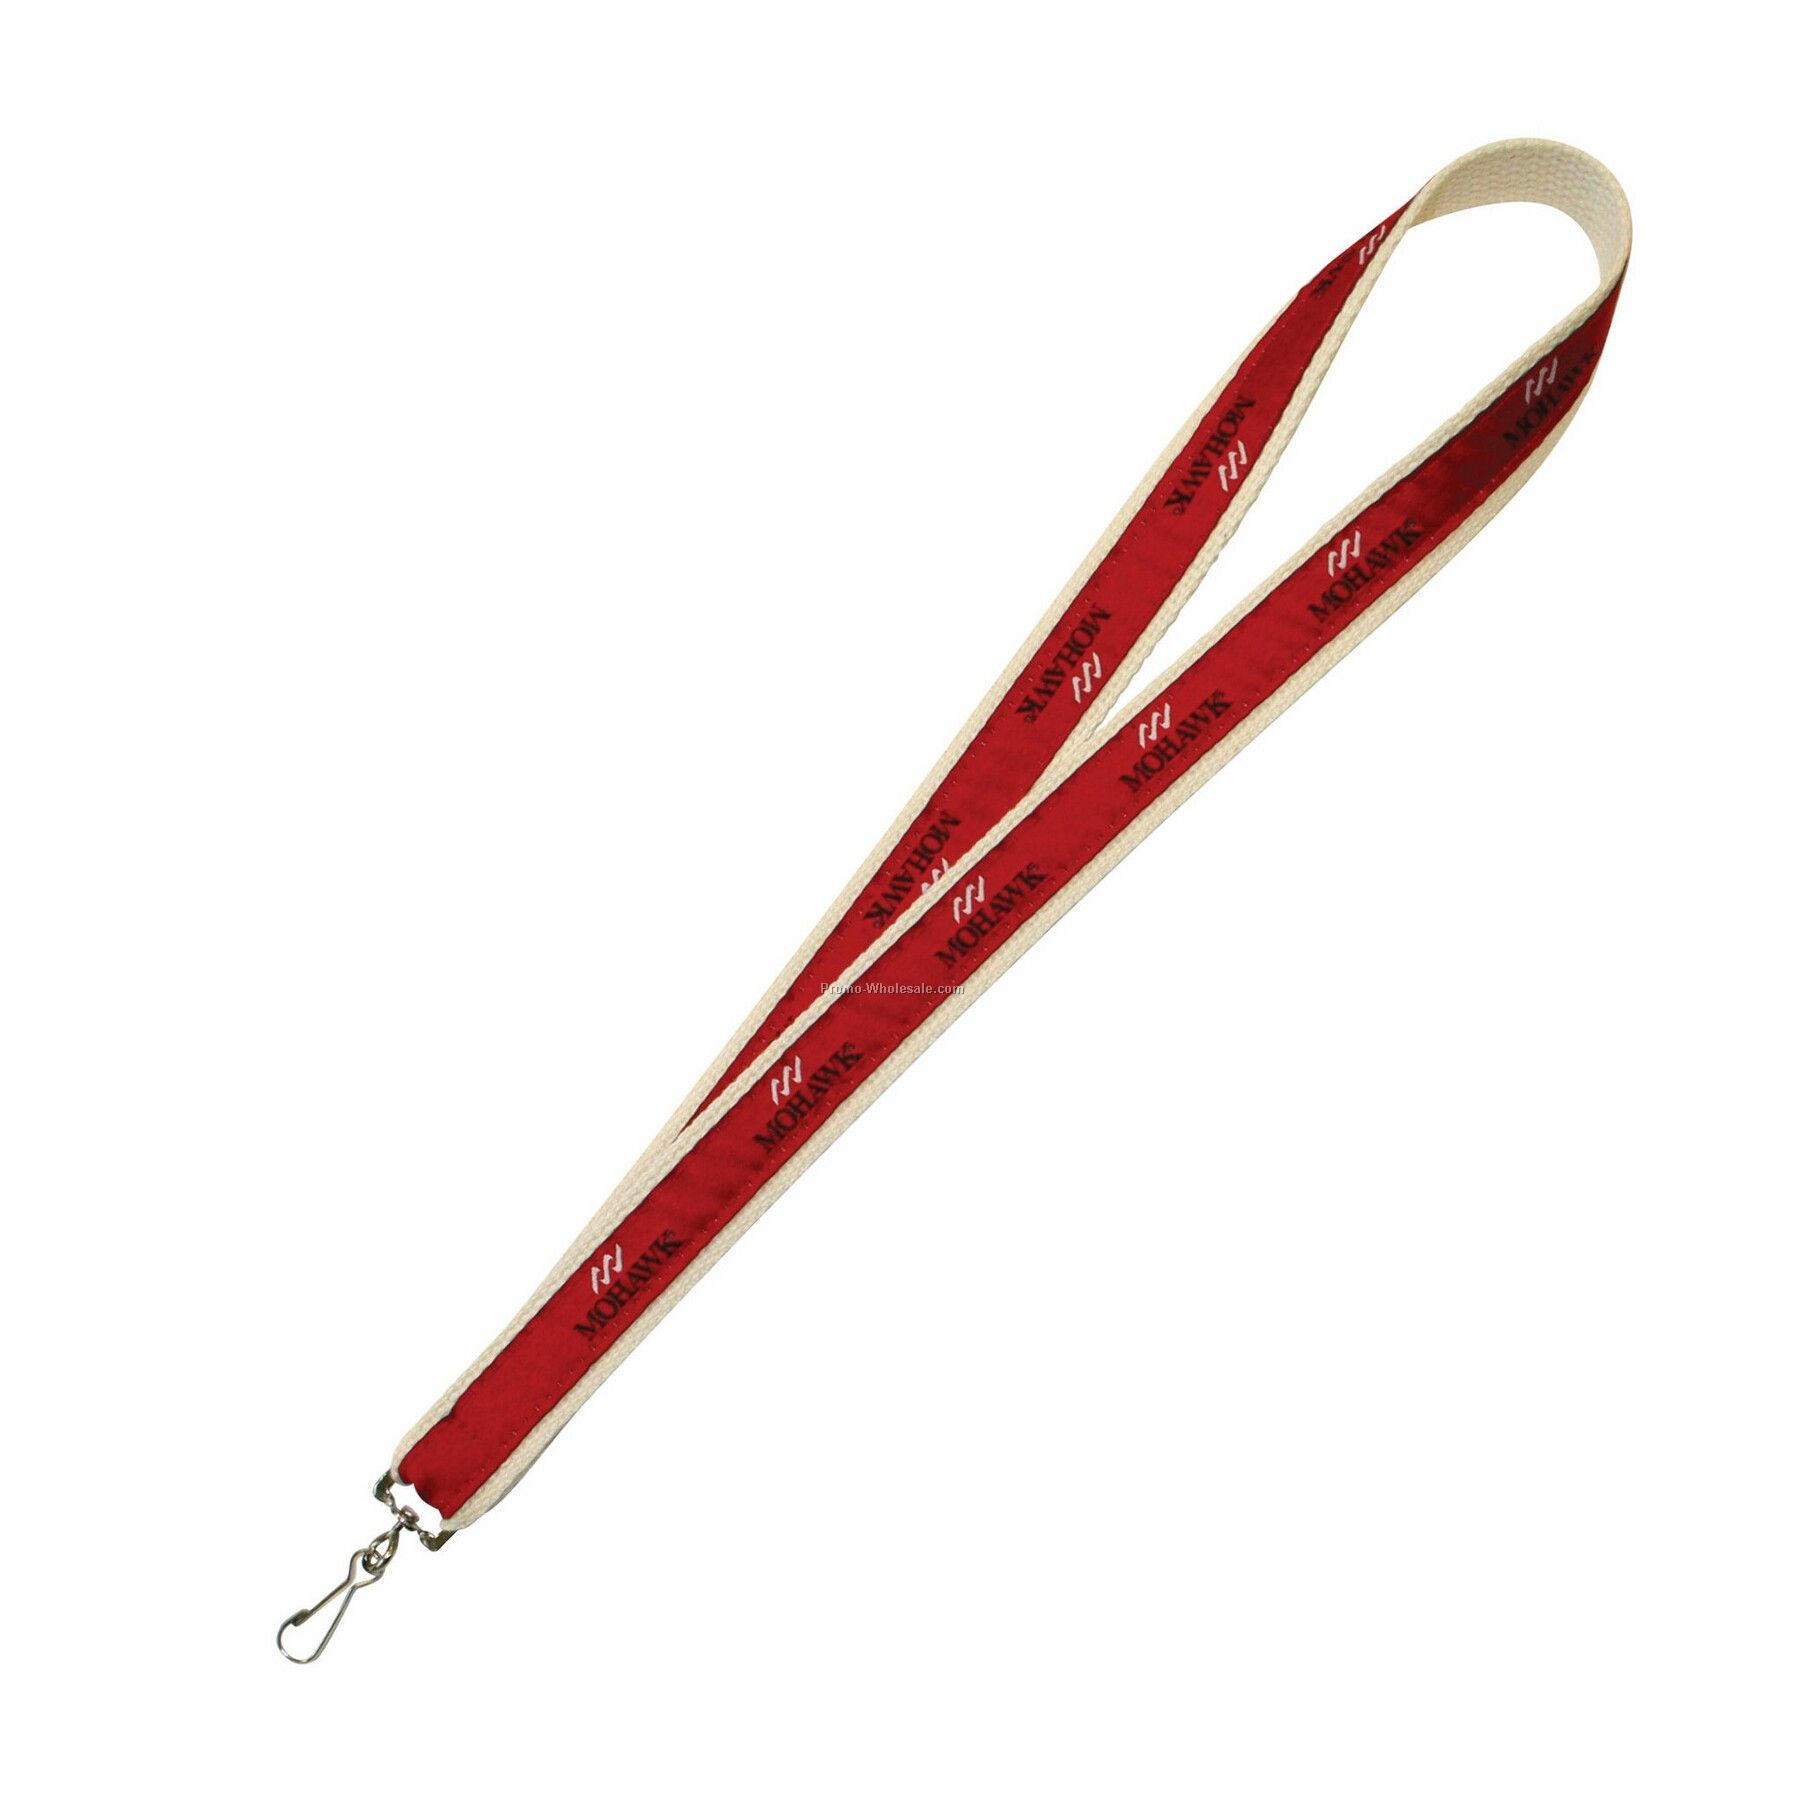 1" X 17-1/2" Organic Lanyard With Swivel Snap By Wov-in Line